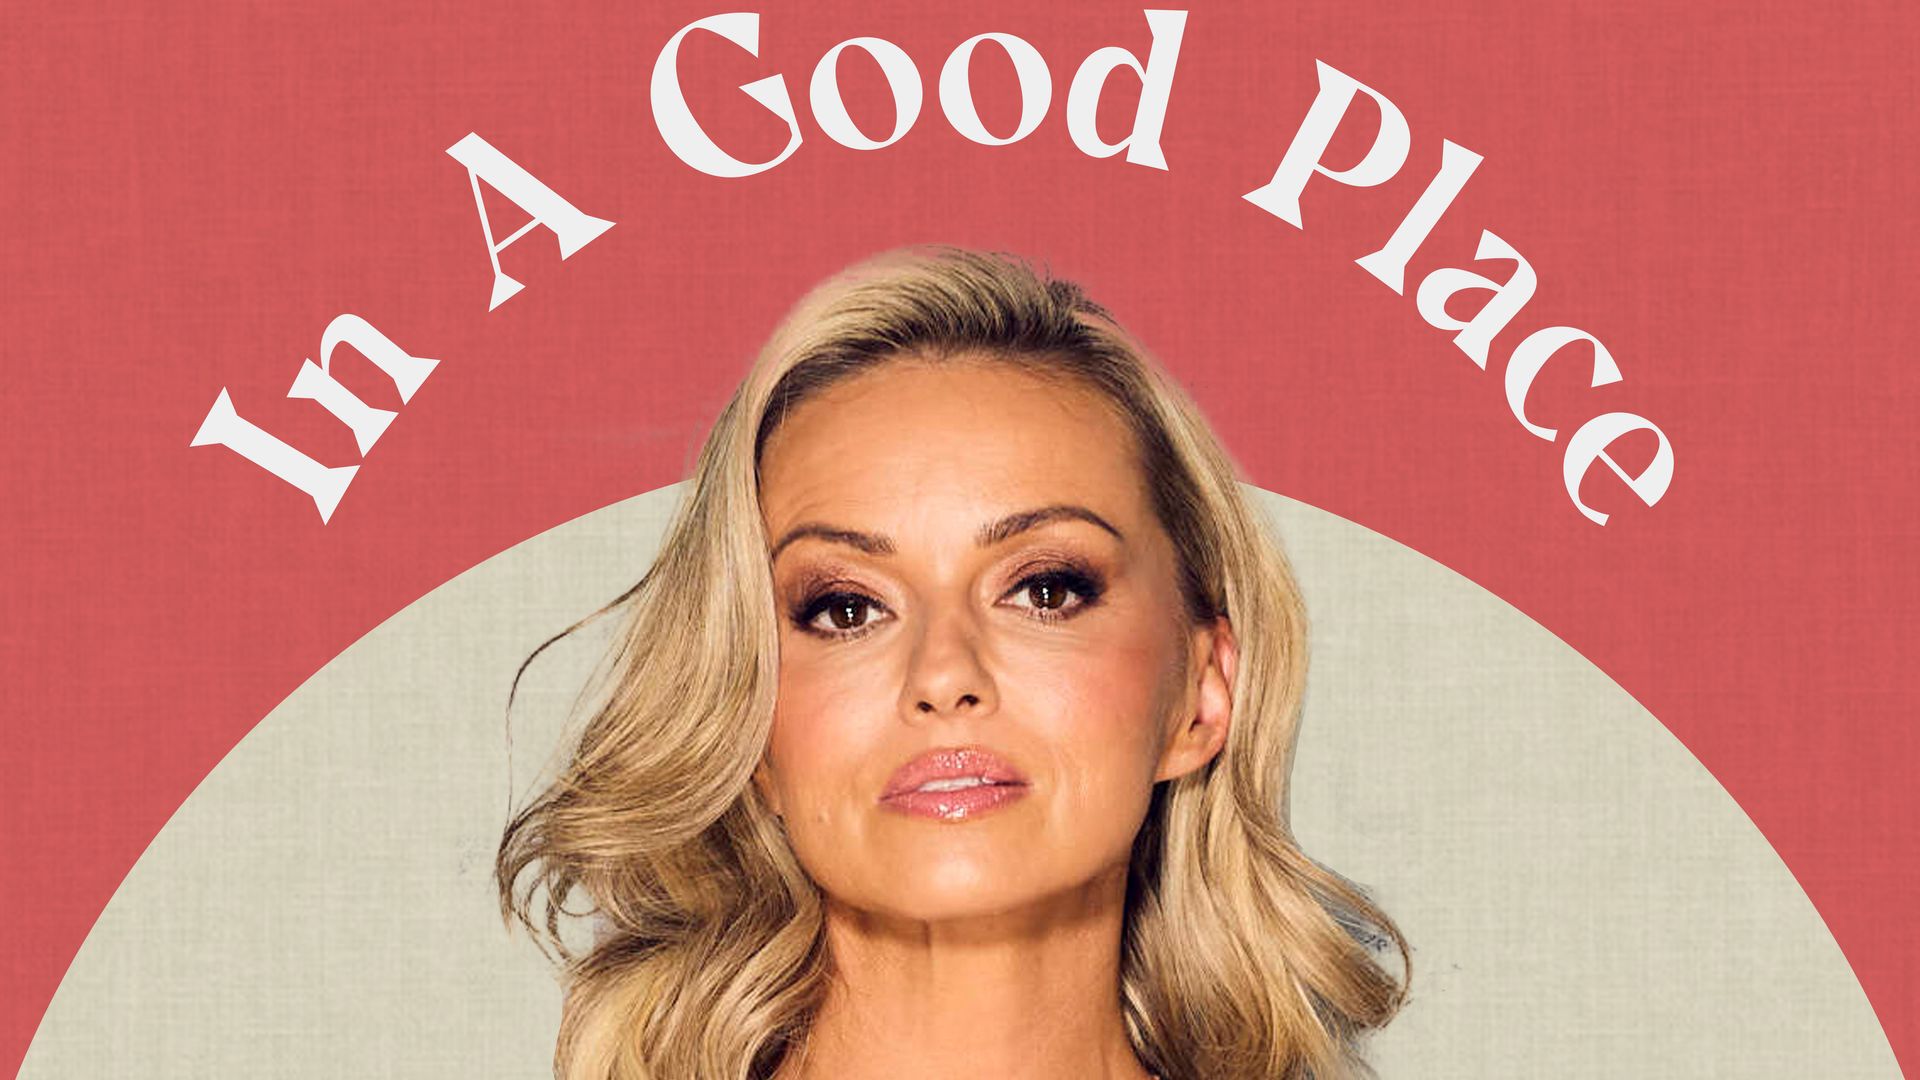 Ola Jordan is the latest guest on HELLO!'s In A Good Place podcast